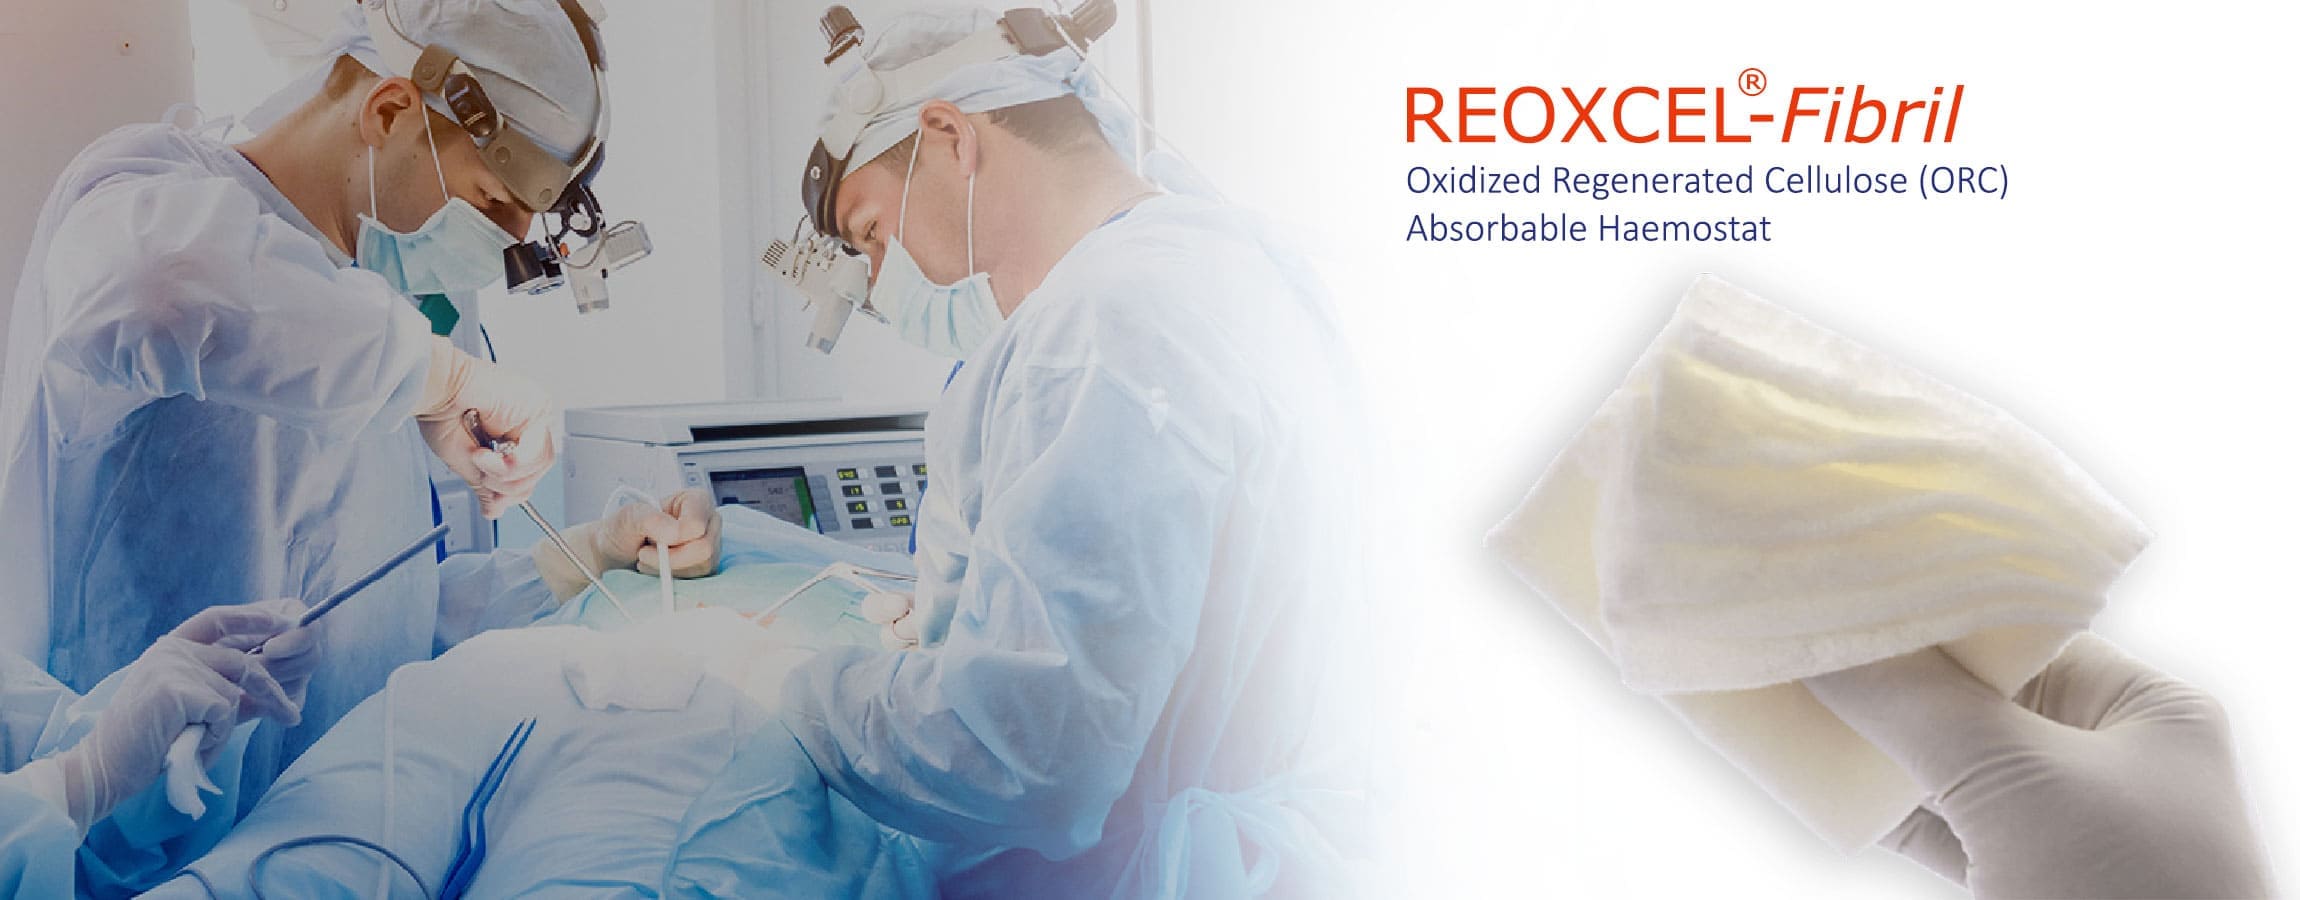 Reoxcel Fibril Absorbable and Sterile Haemostat Usage In Surgerys